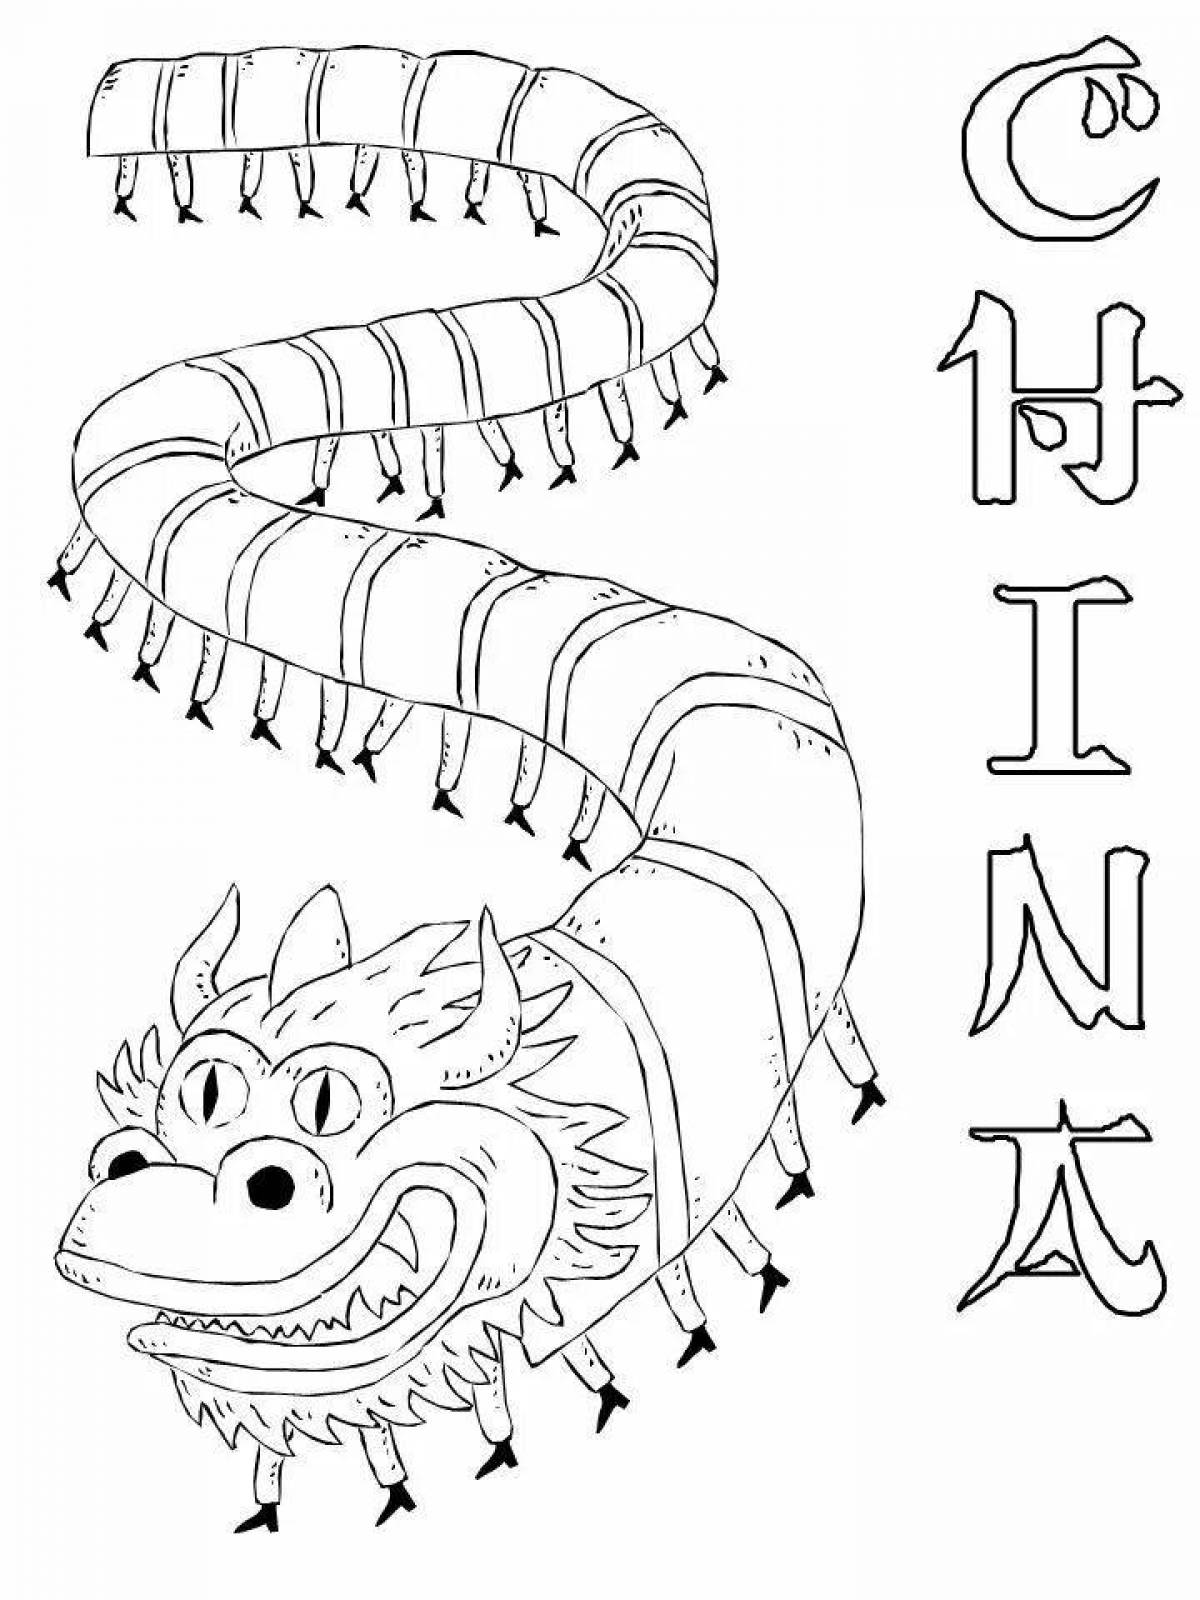 Merry Chinese New Year coloring book